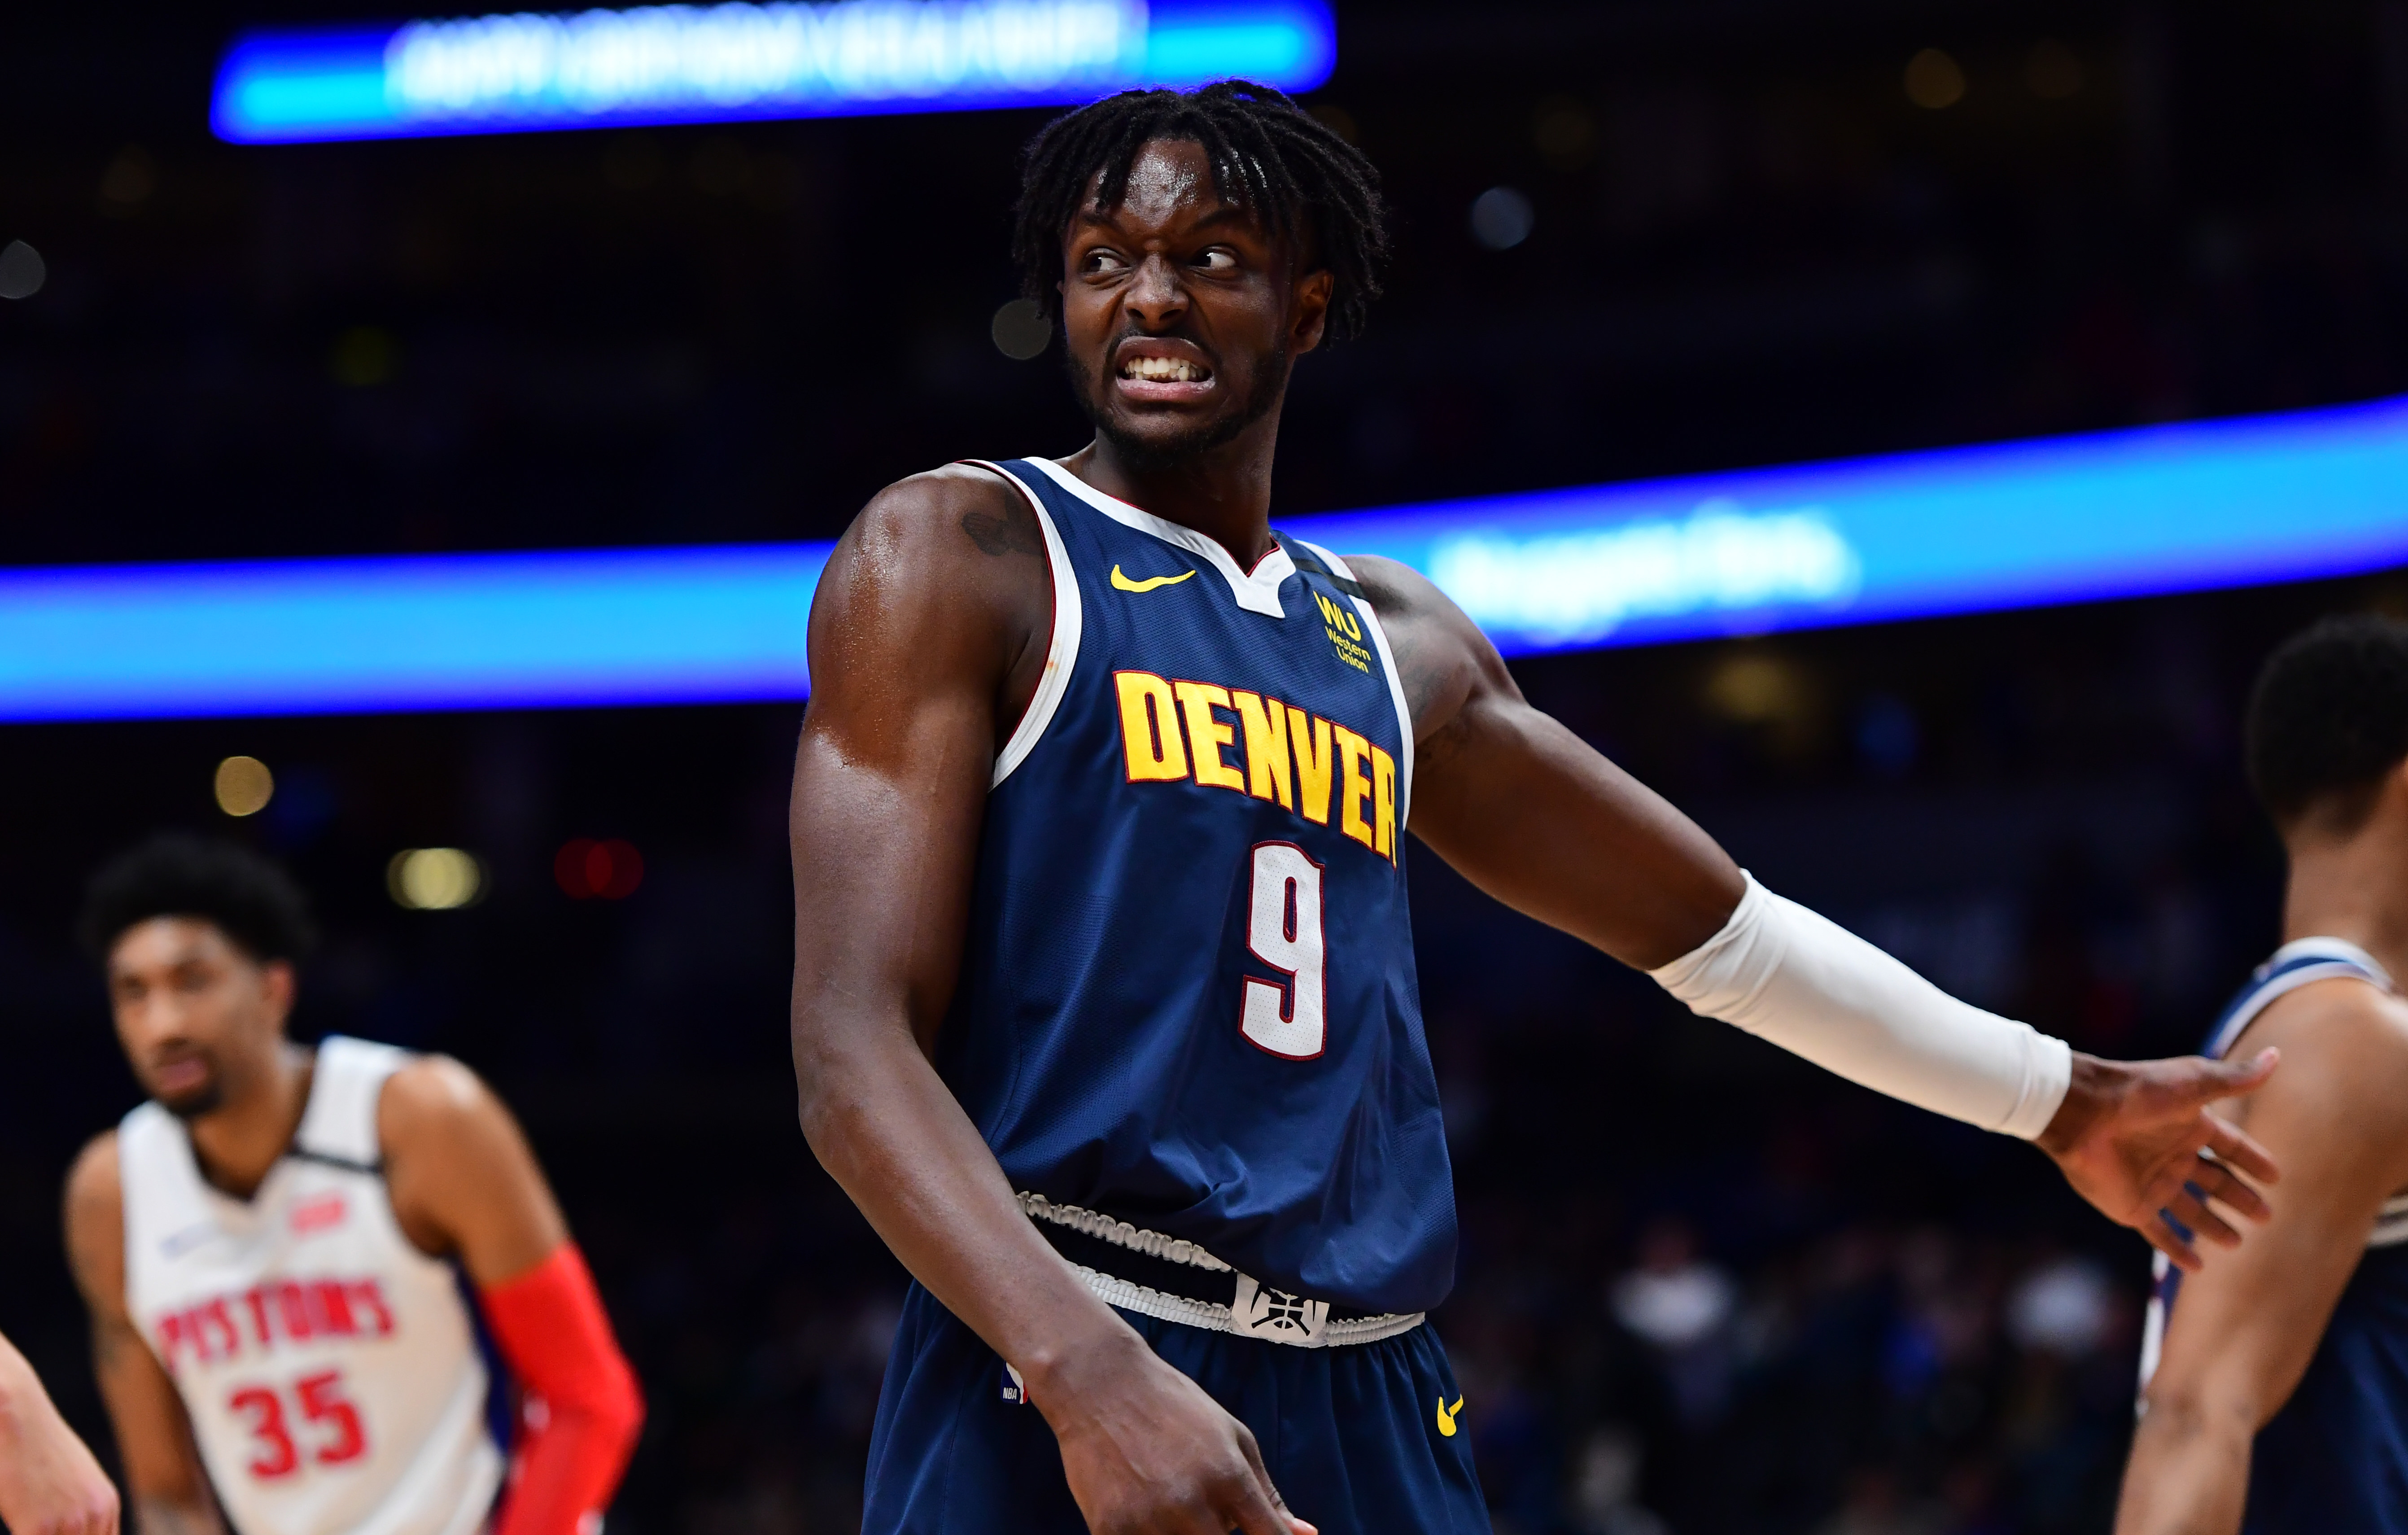 Denver Nuggets forward Jerami Grant (9) celebrates defeating the against the Detroit Pistons at the Pepsi Center.